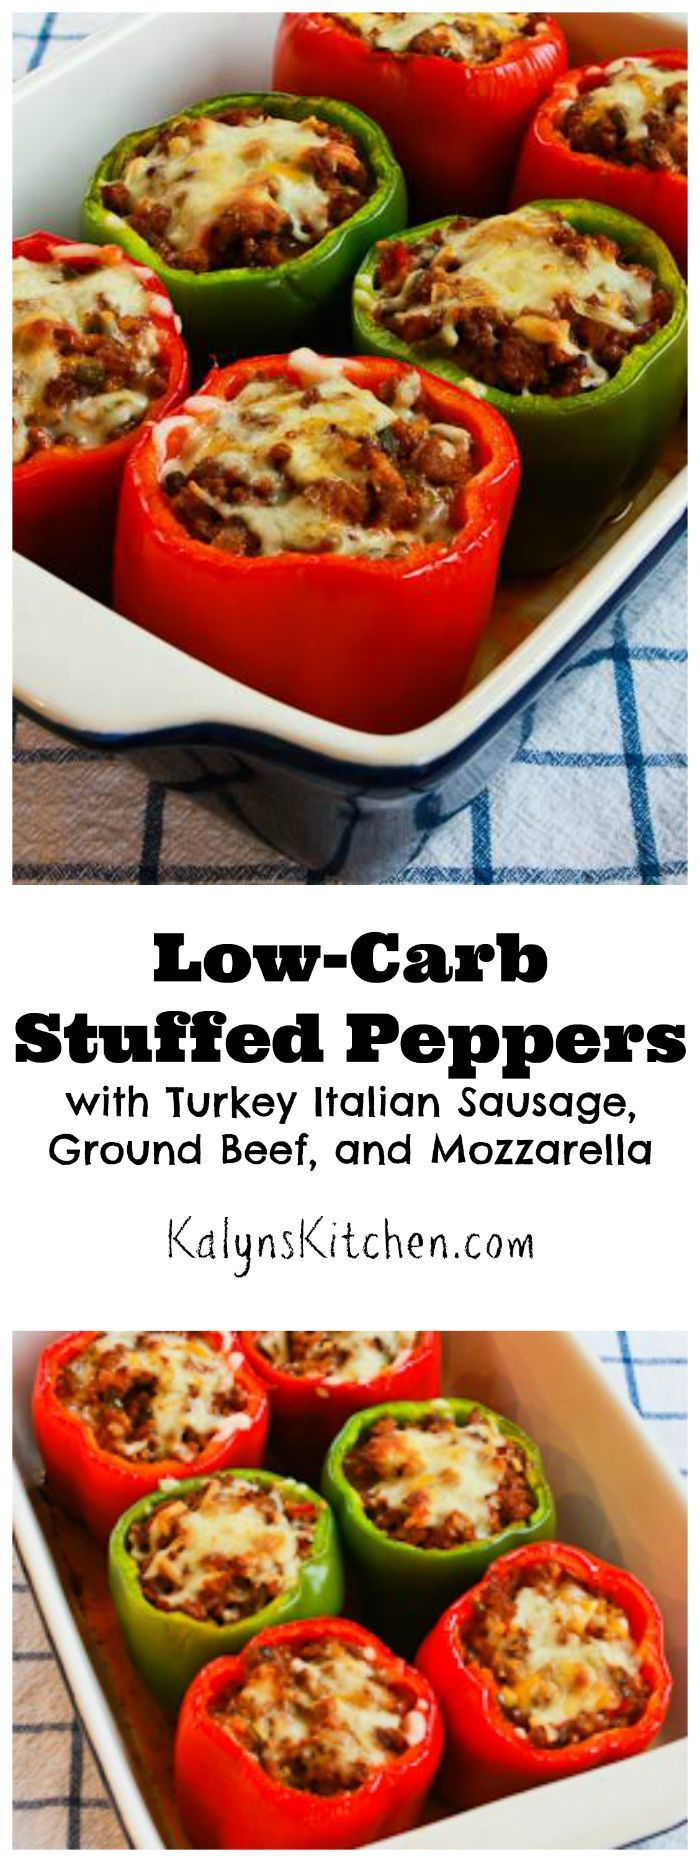 Low Carb Stuffed Peppers Recipe With Ground Beef
 Best 25 Paleo ground beef ideas on Pinterest